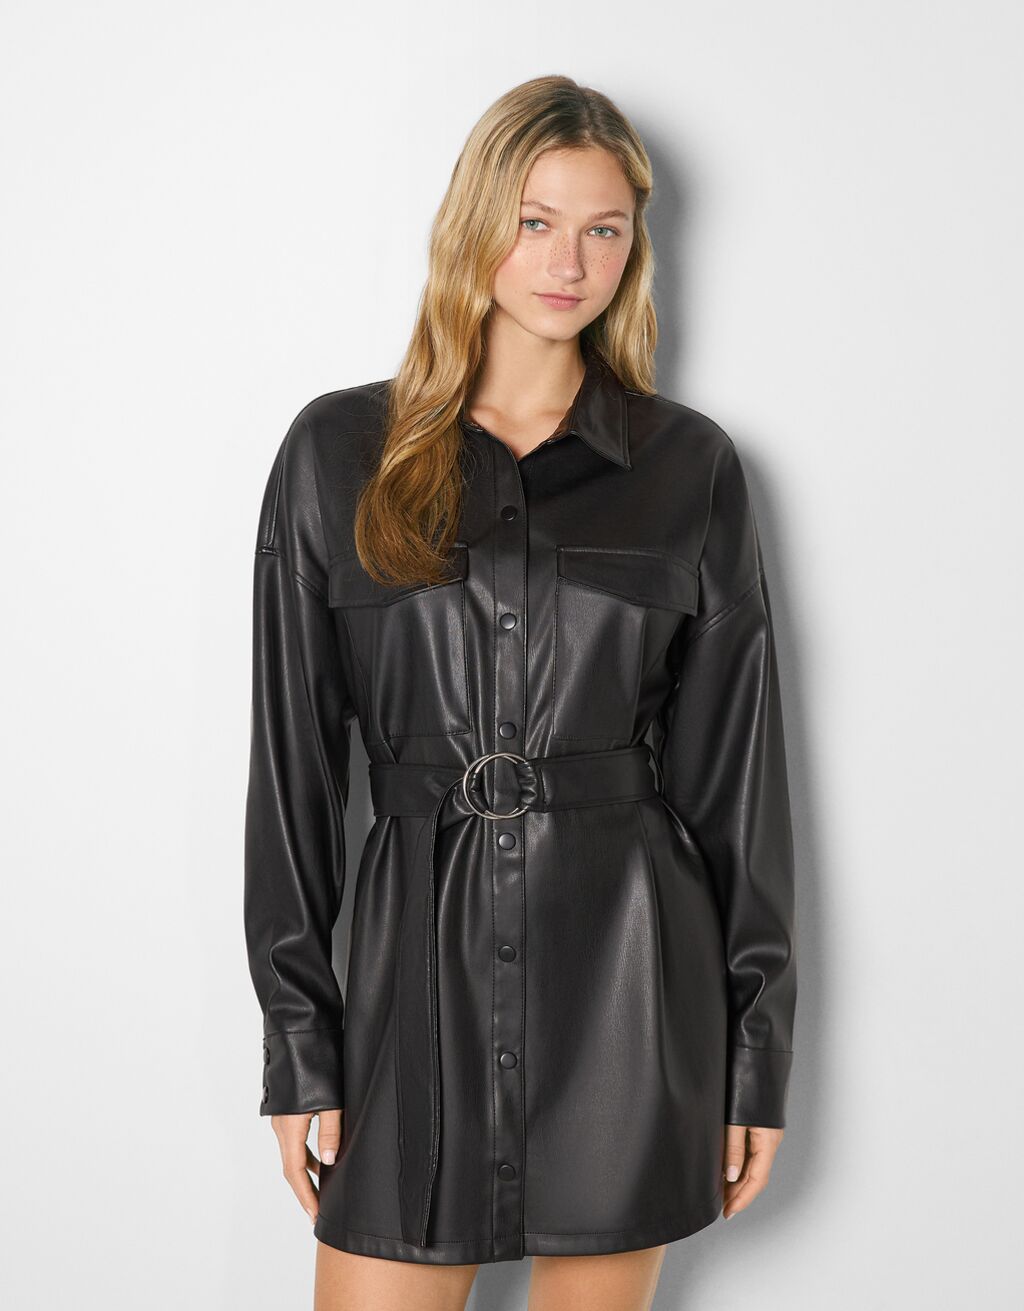 Long sleeve faux leather shirt dress with belt - Shirts and blouses - Woman